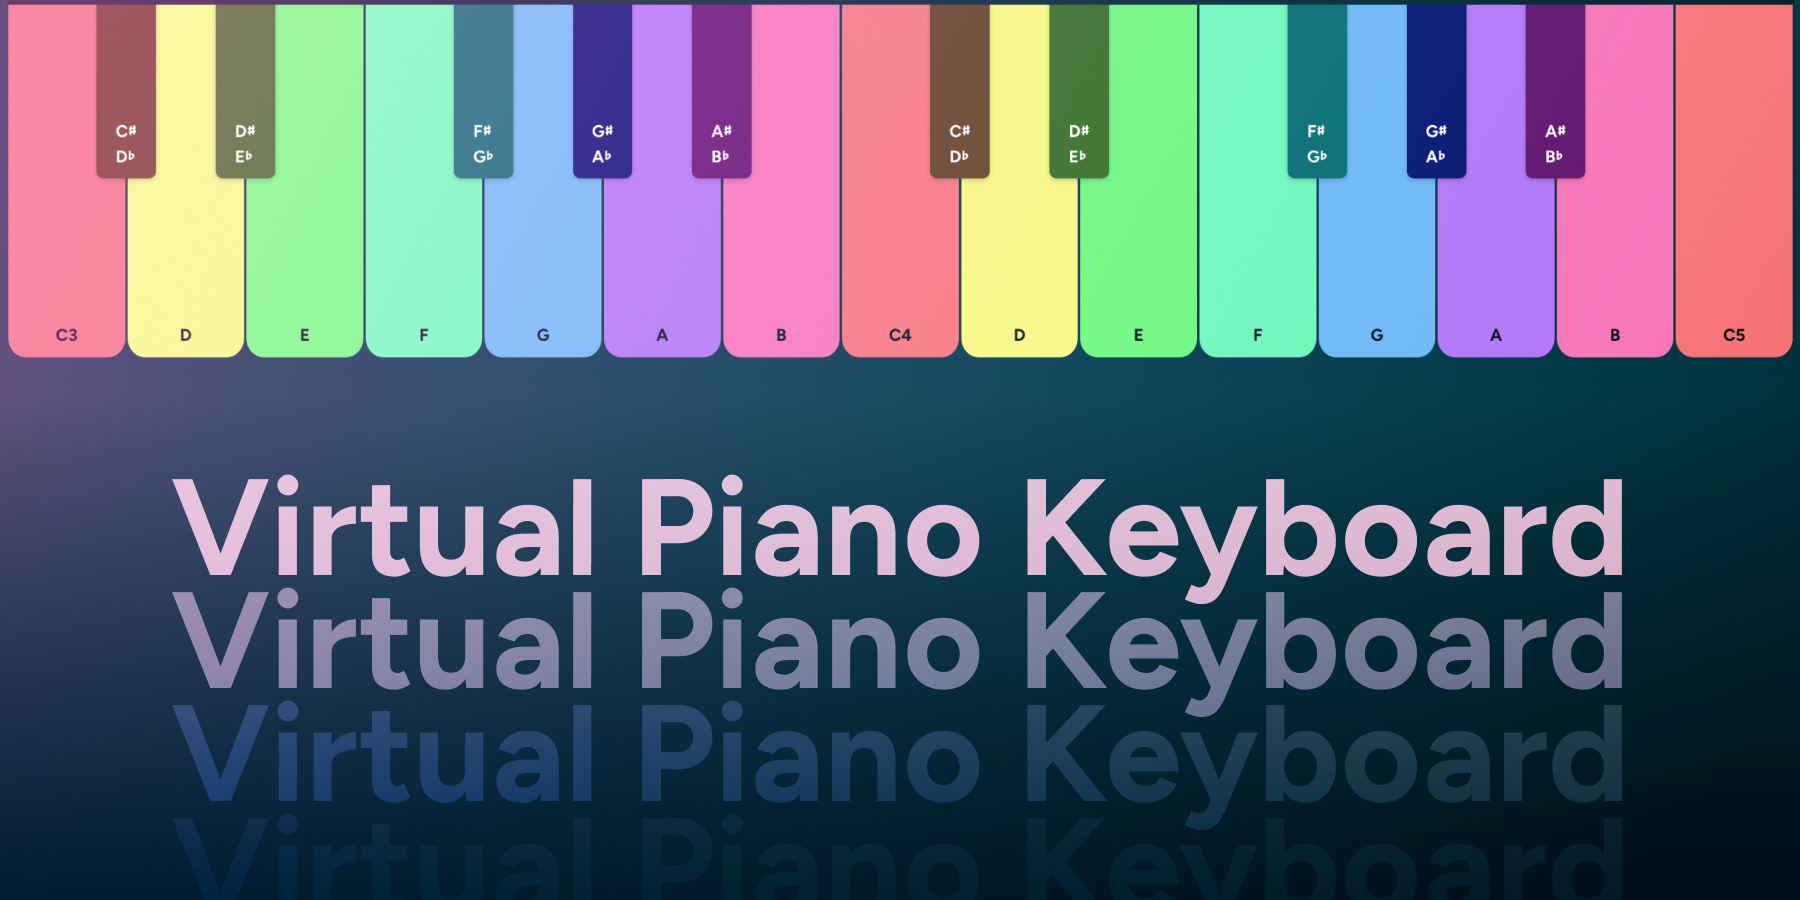 MIDI Piano Online — Play for free at